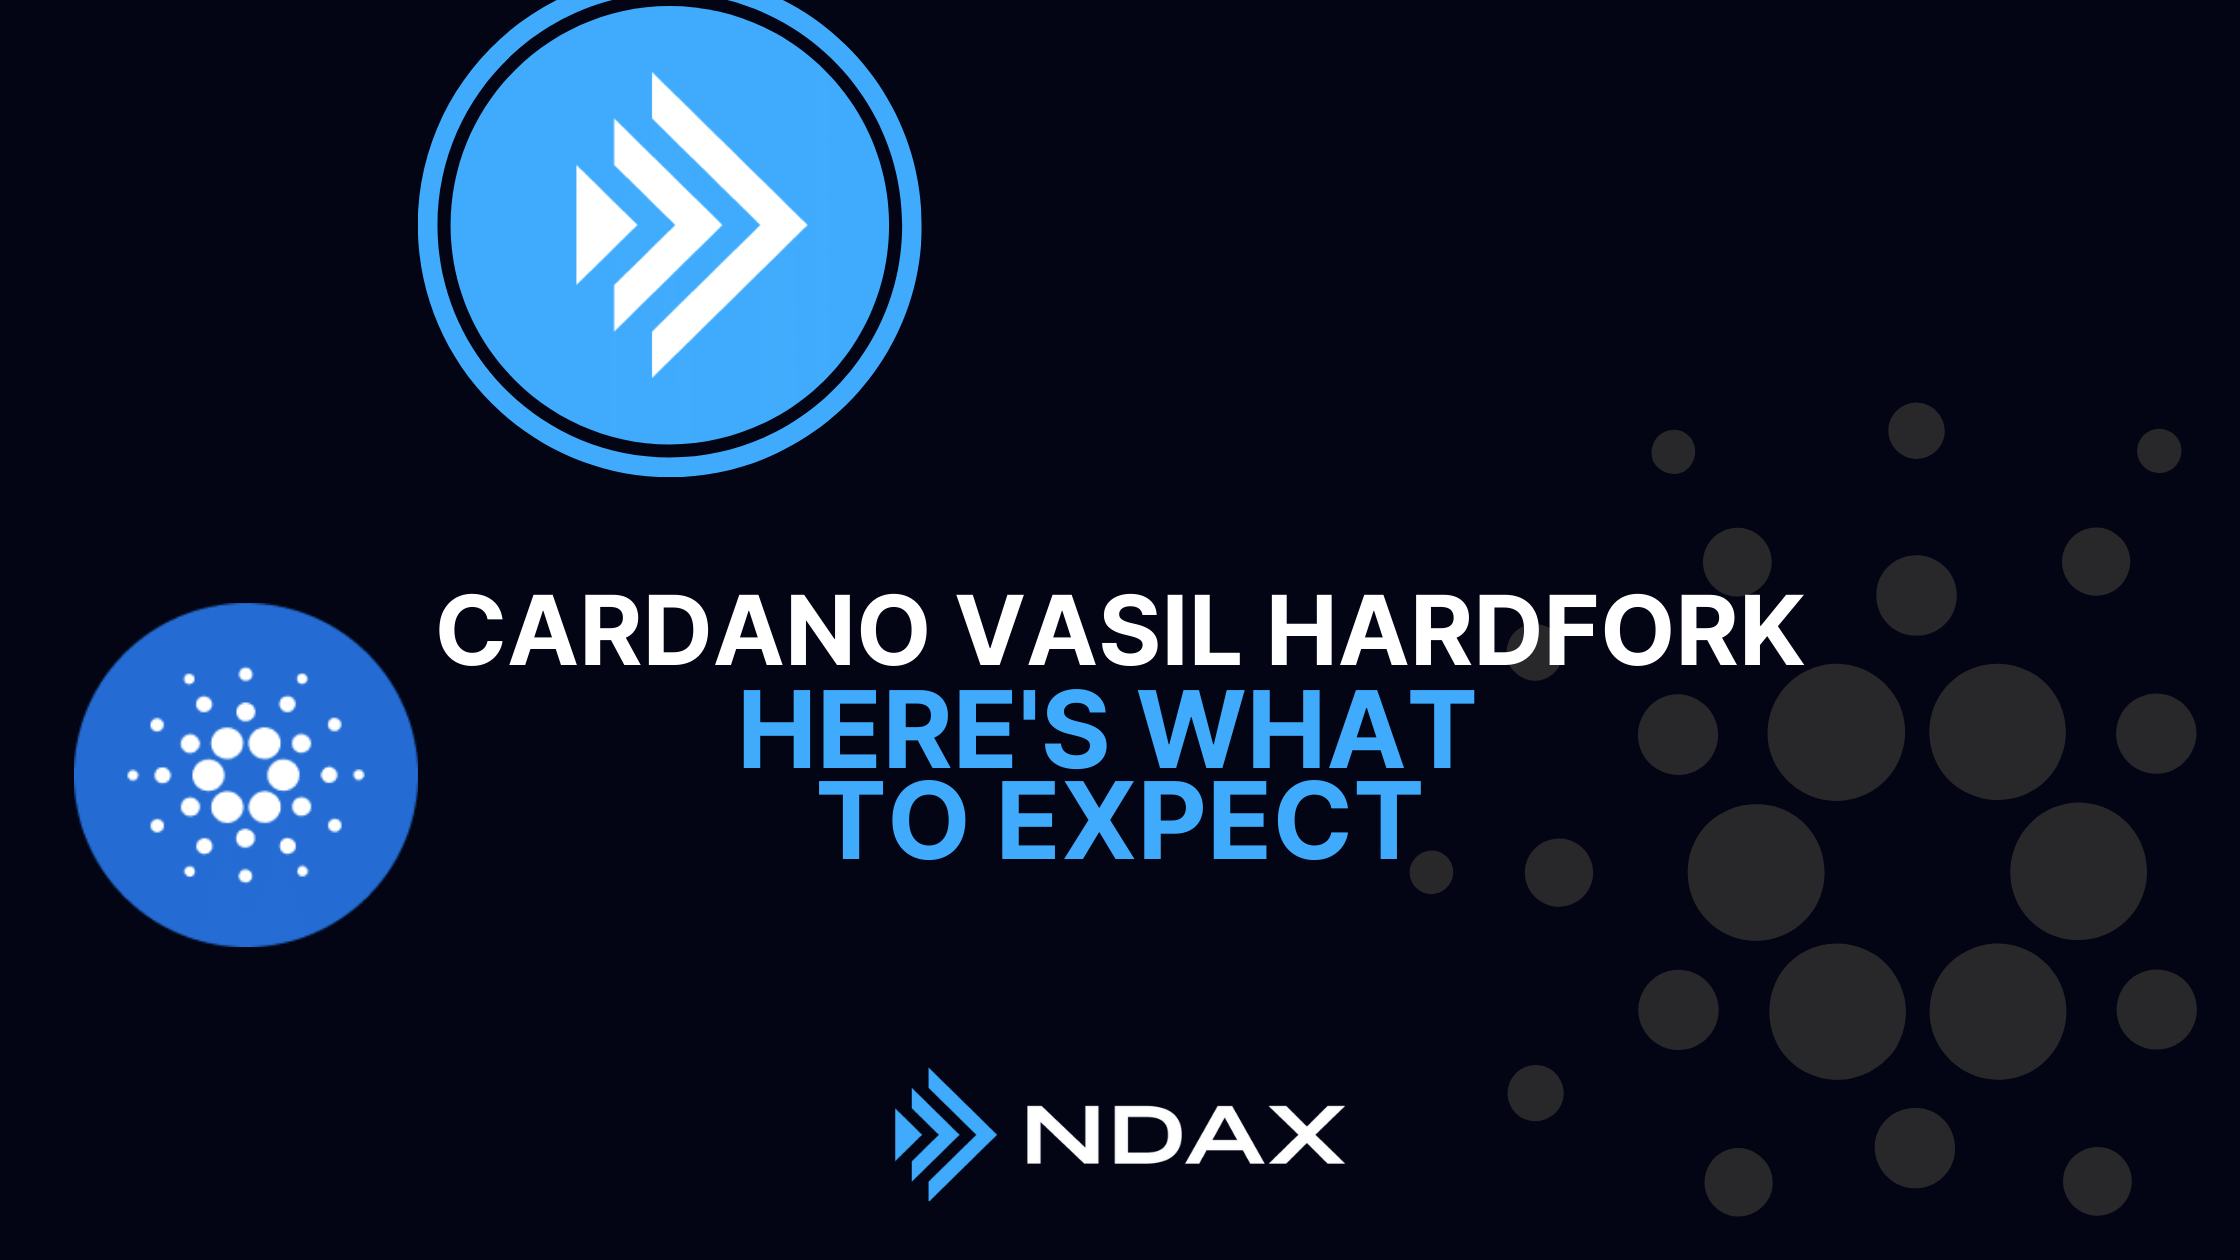 New Cardano Vasil Hard Fork - Here's what to expect